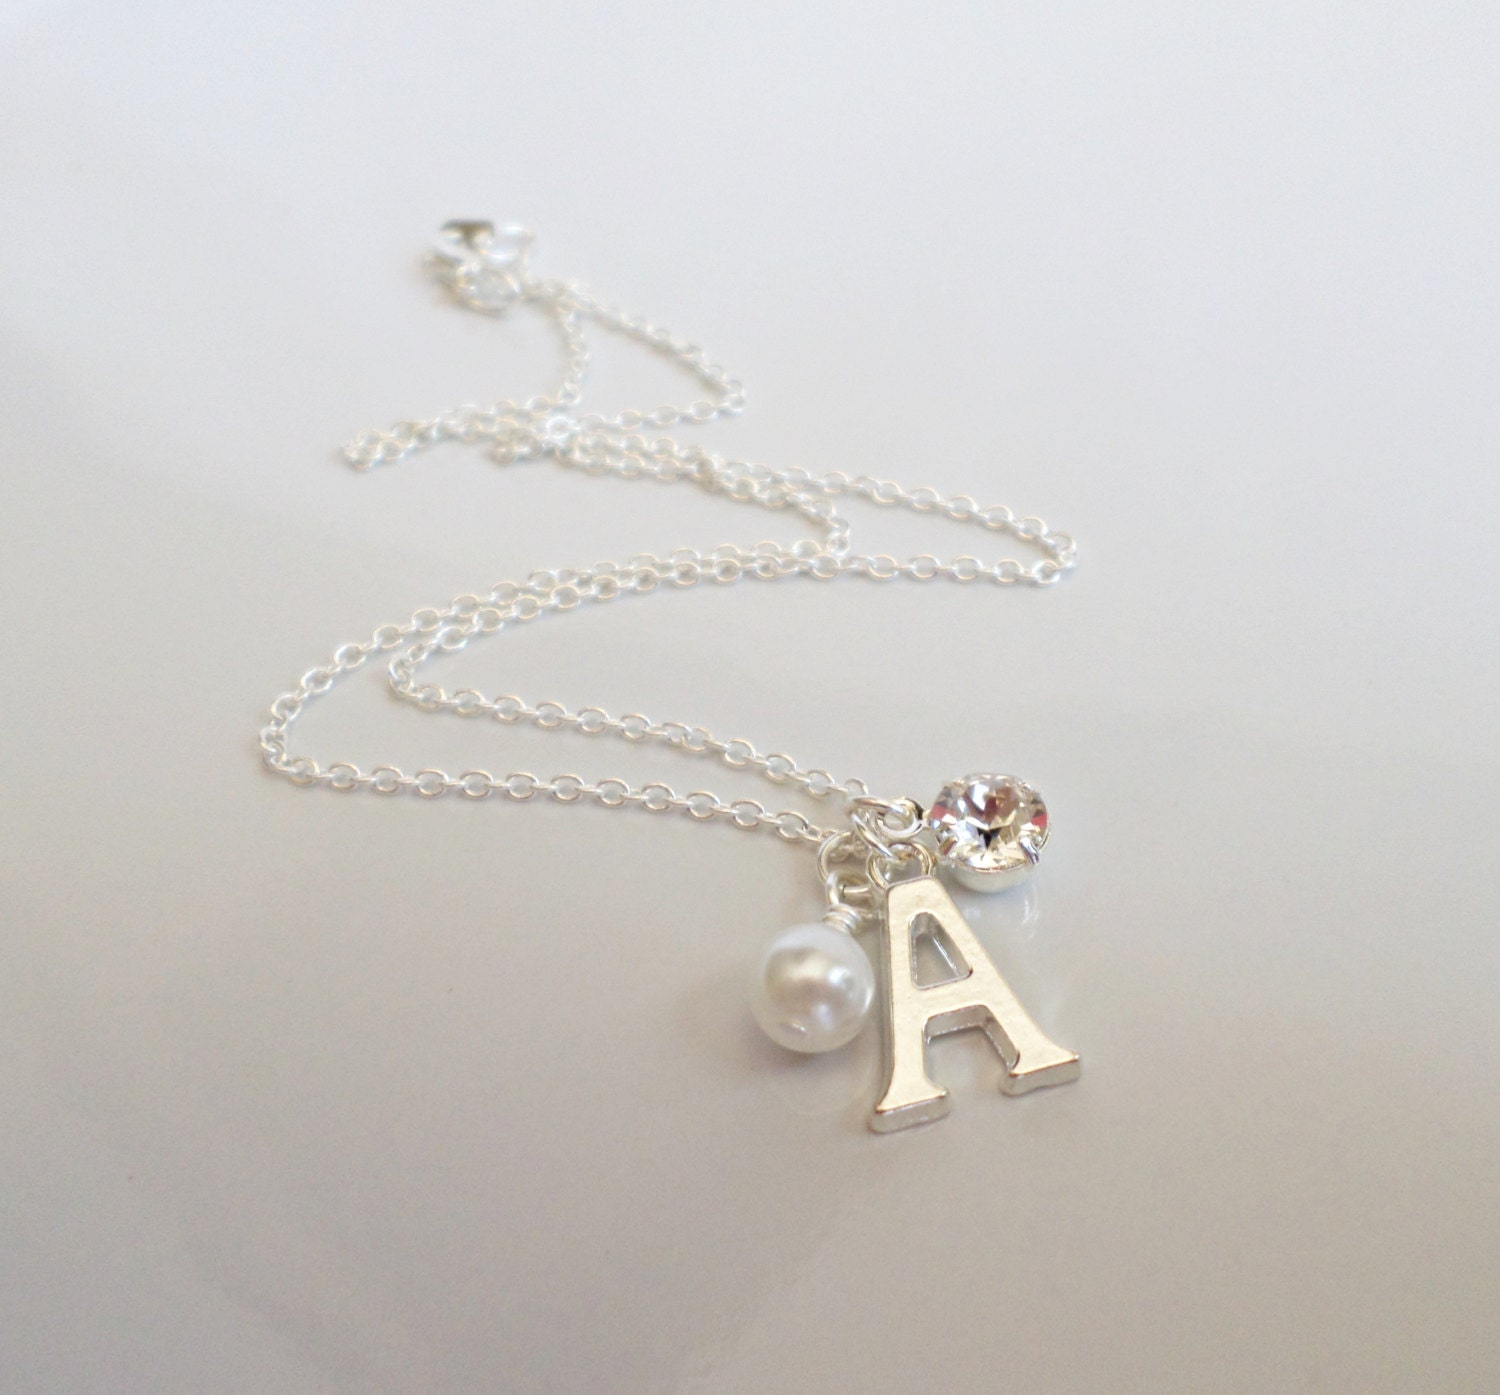 FREE SHIPPING Personalized Flower Girl Necklace, Flower Girl Letter Charm Necklace, Personalized Flower Girl Gift, Girls Initial Necklace - JessicasBridal